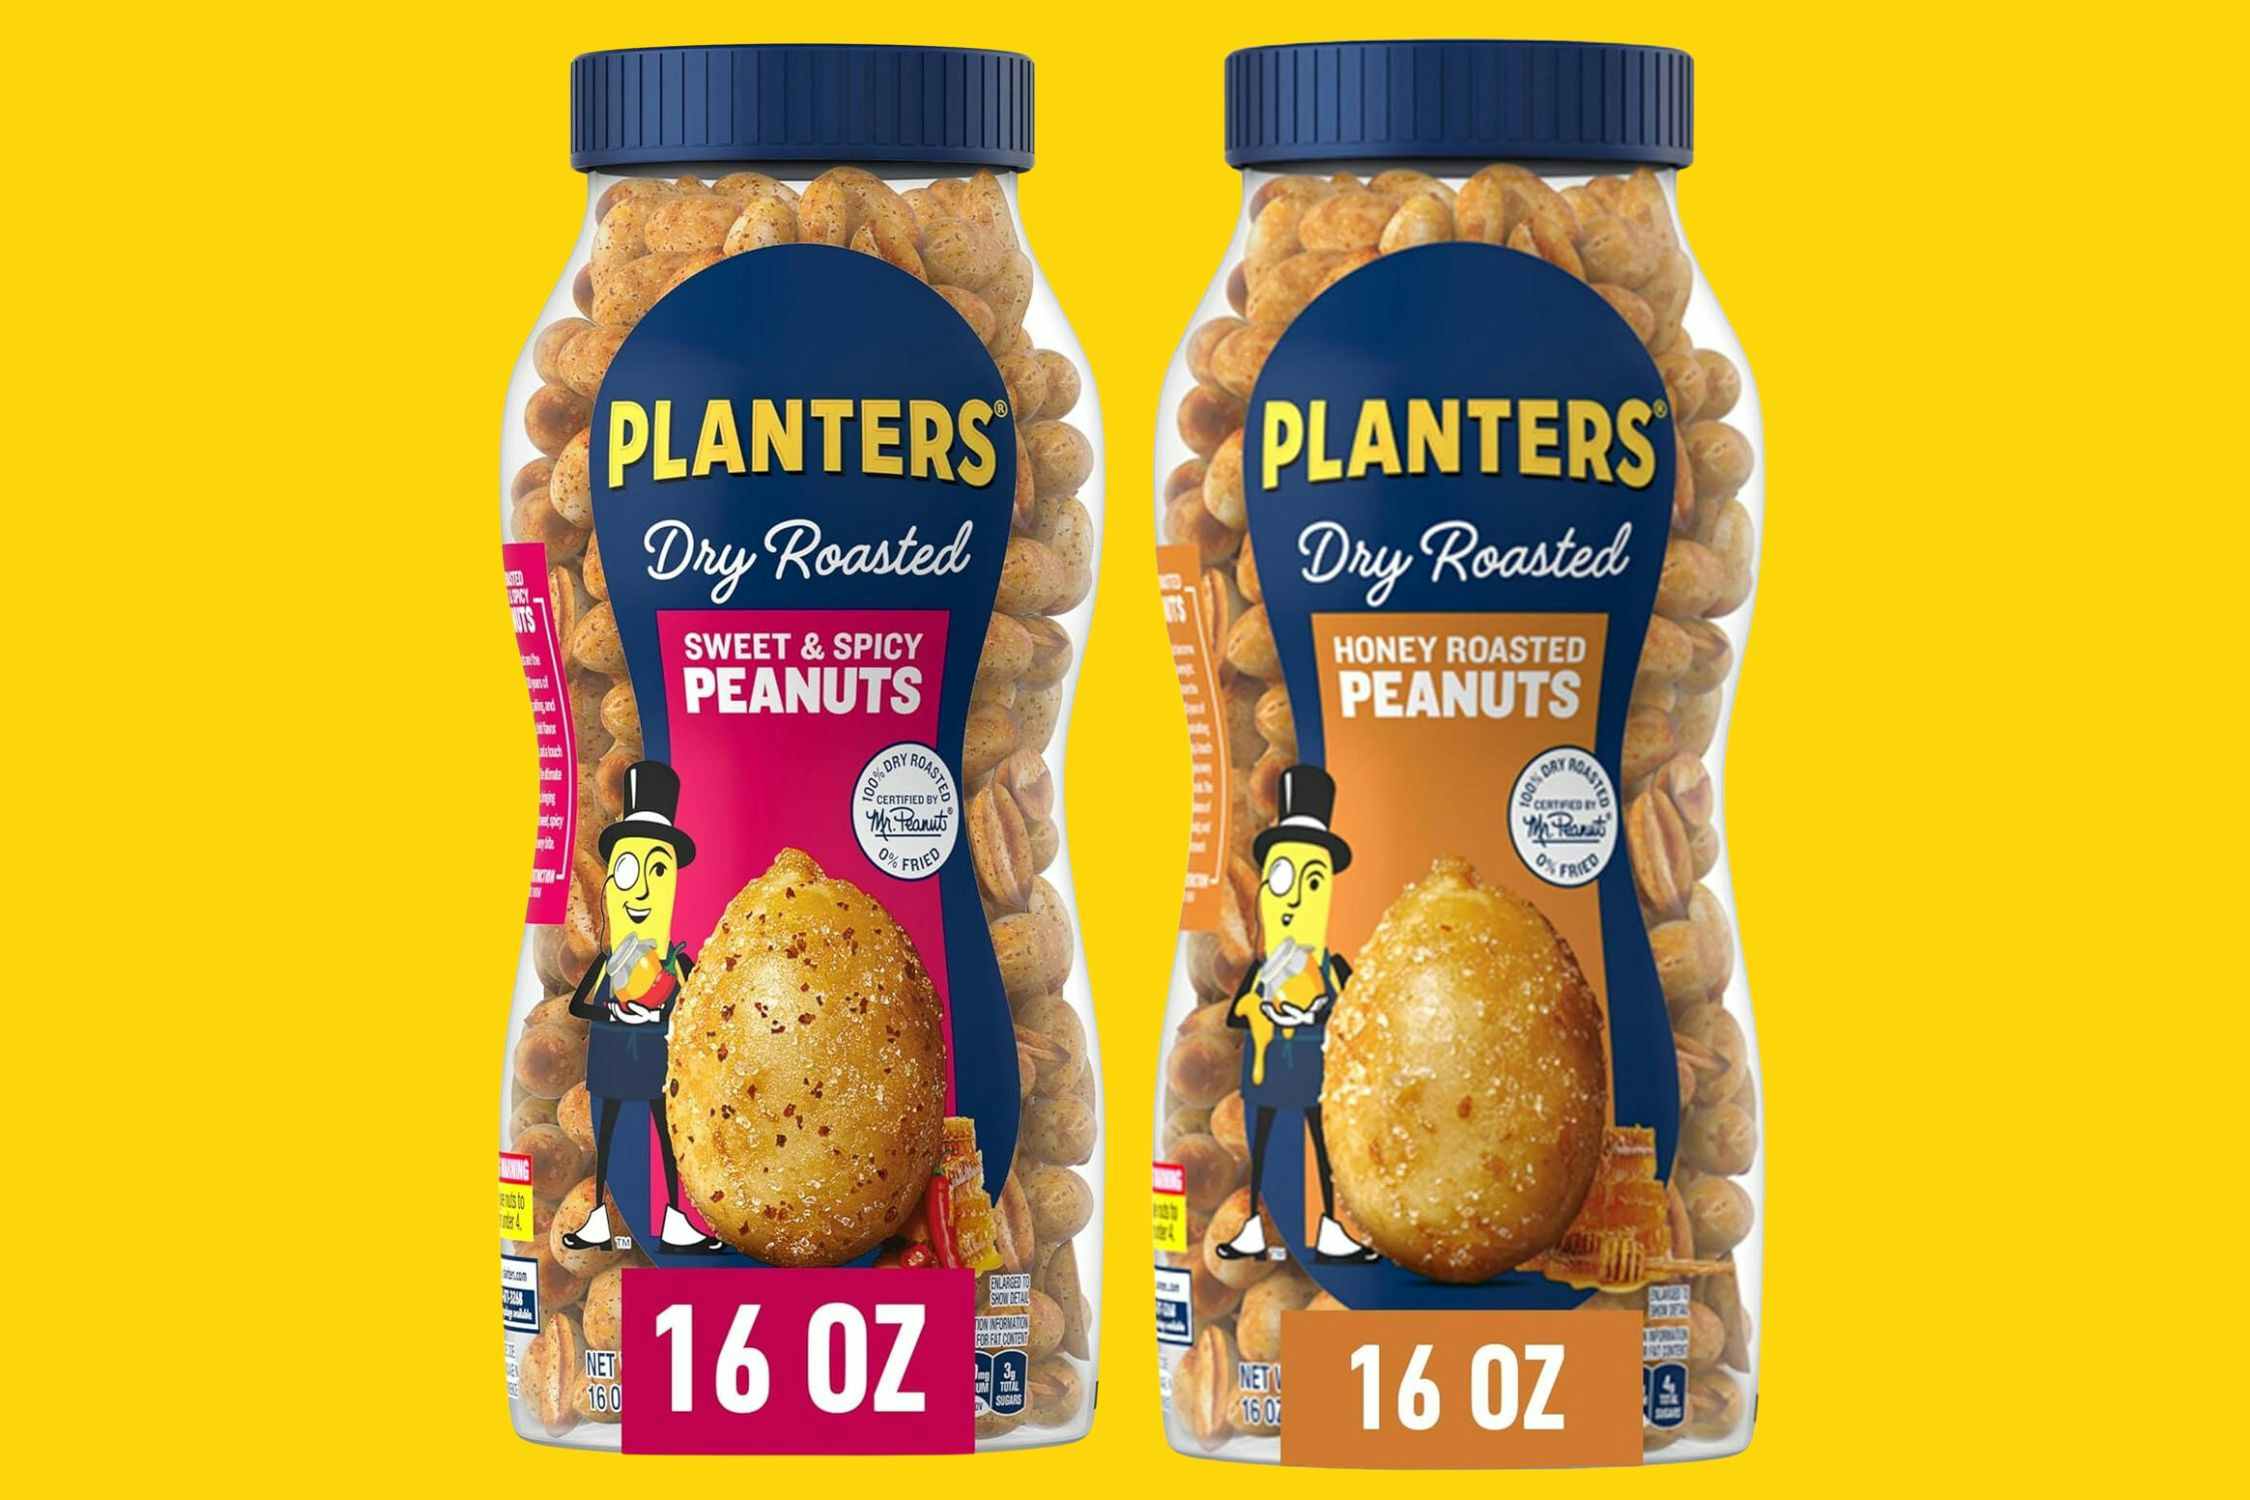 Get a 16-Ounce Jar of Planters Peanuts for as Low as $1.64 on Amazon